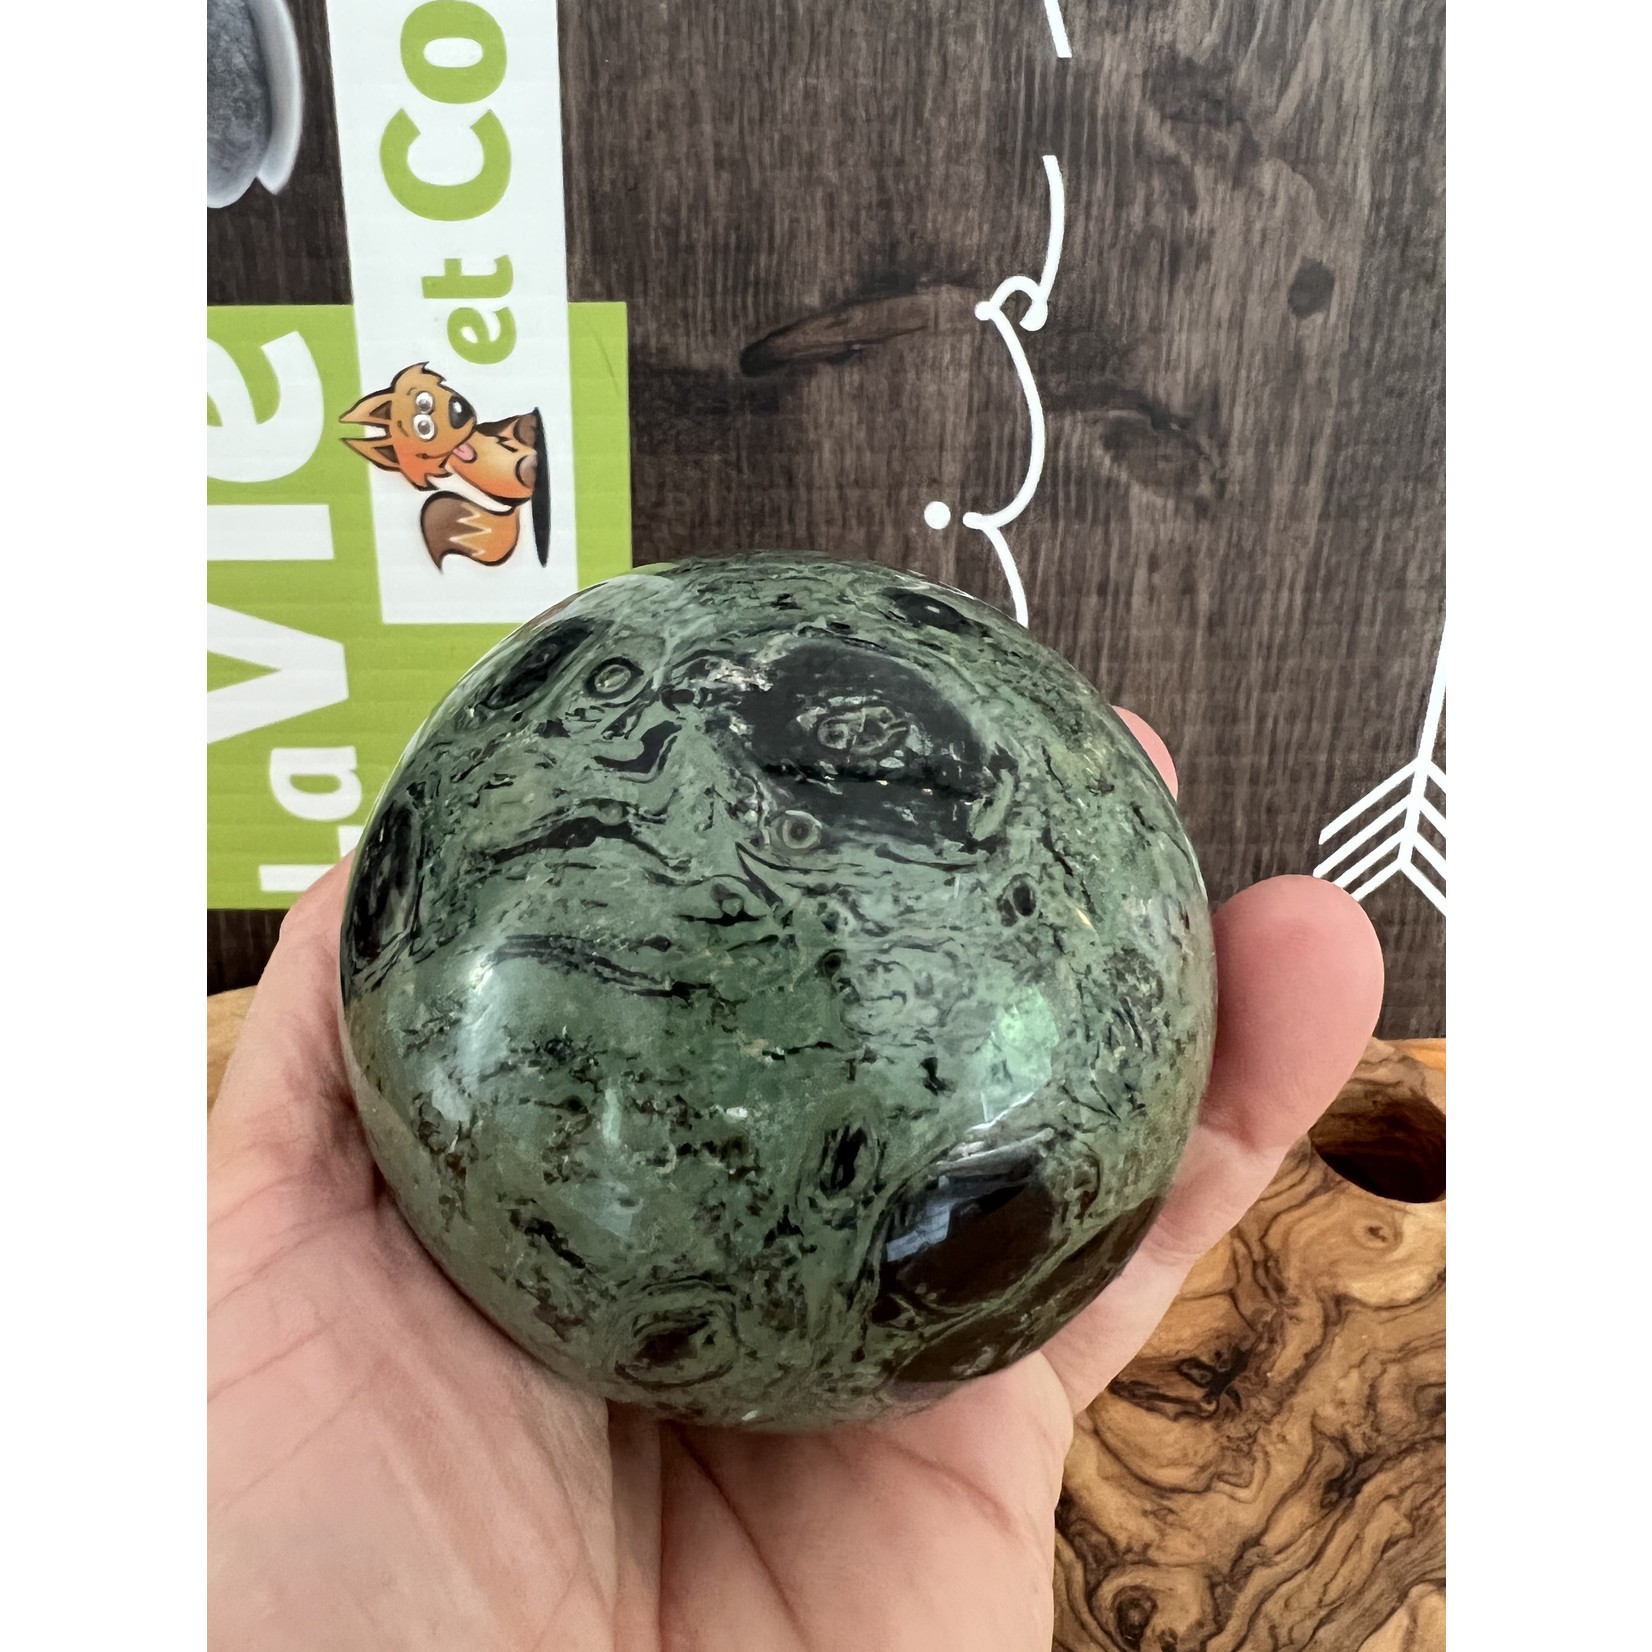 impressive kambaba jasper sphere XL, helps to enjoy the present moment without dwelling on the past or being anxious about the future